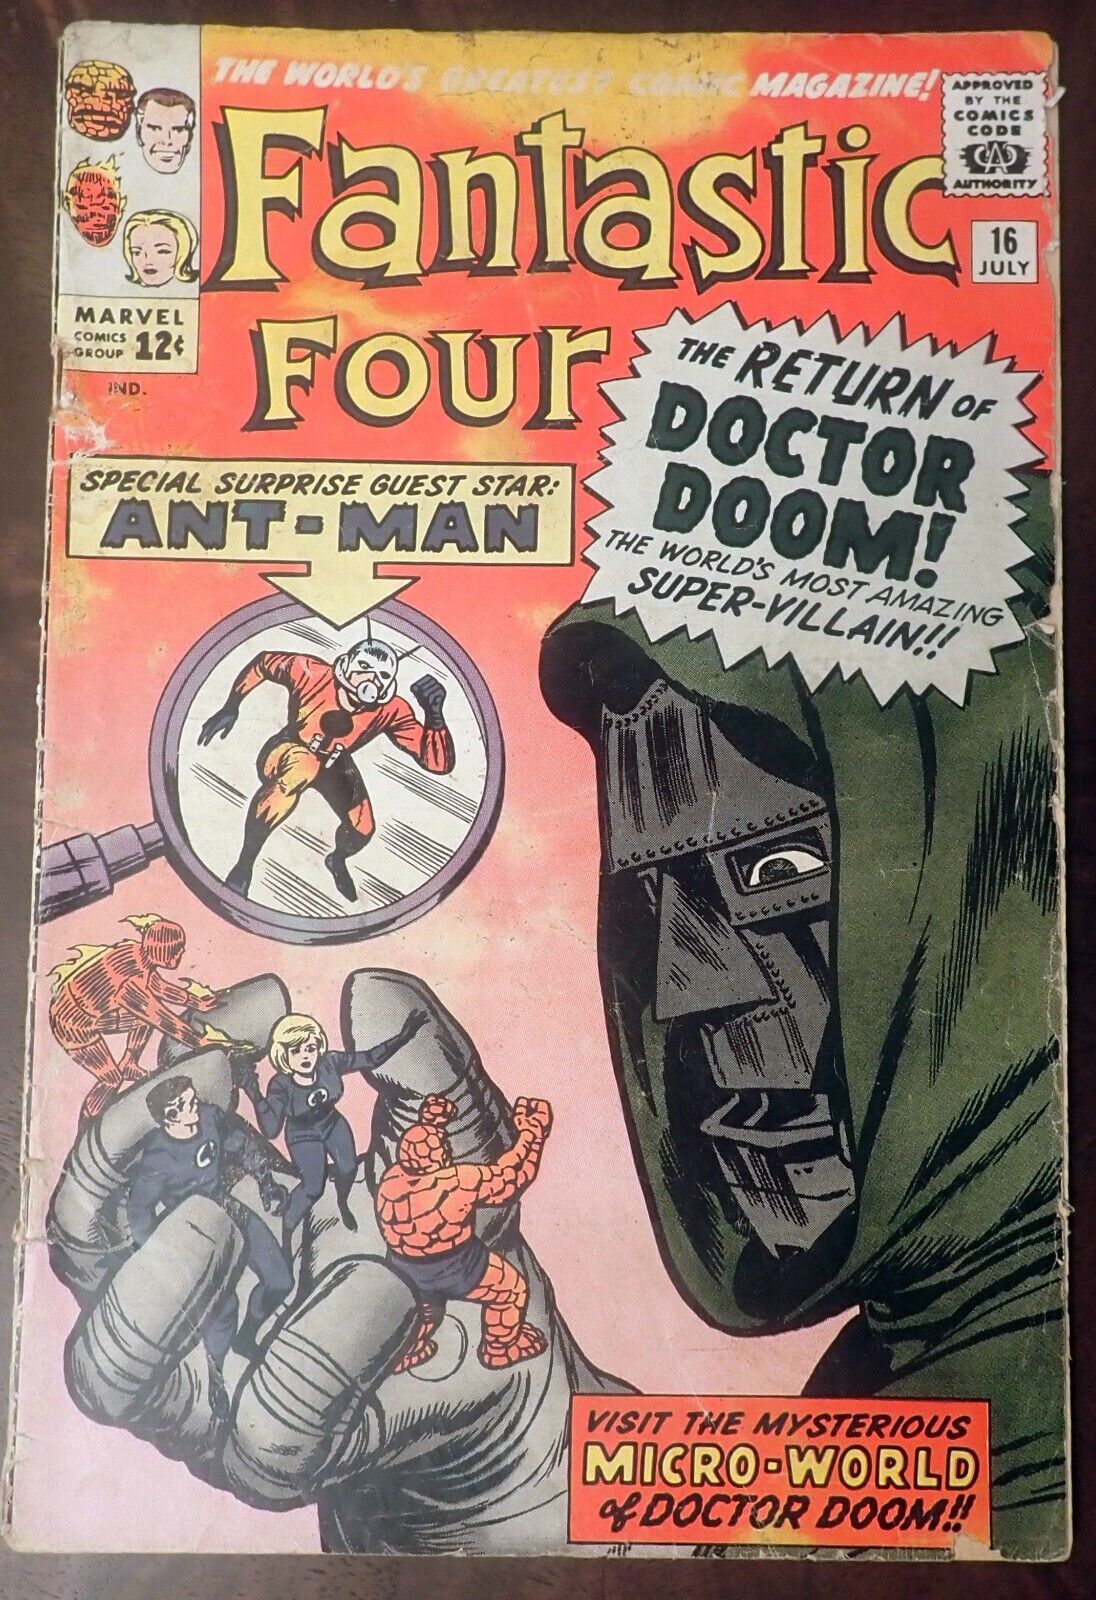 Fantastic Four #16 EARLY ANTMAN and DOCTOR DOOM 1963